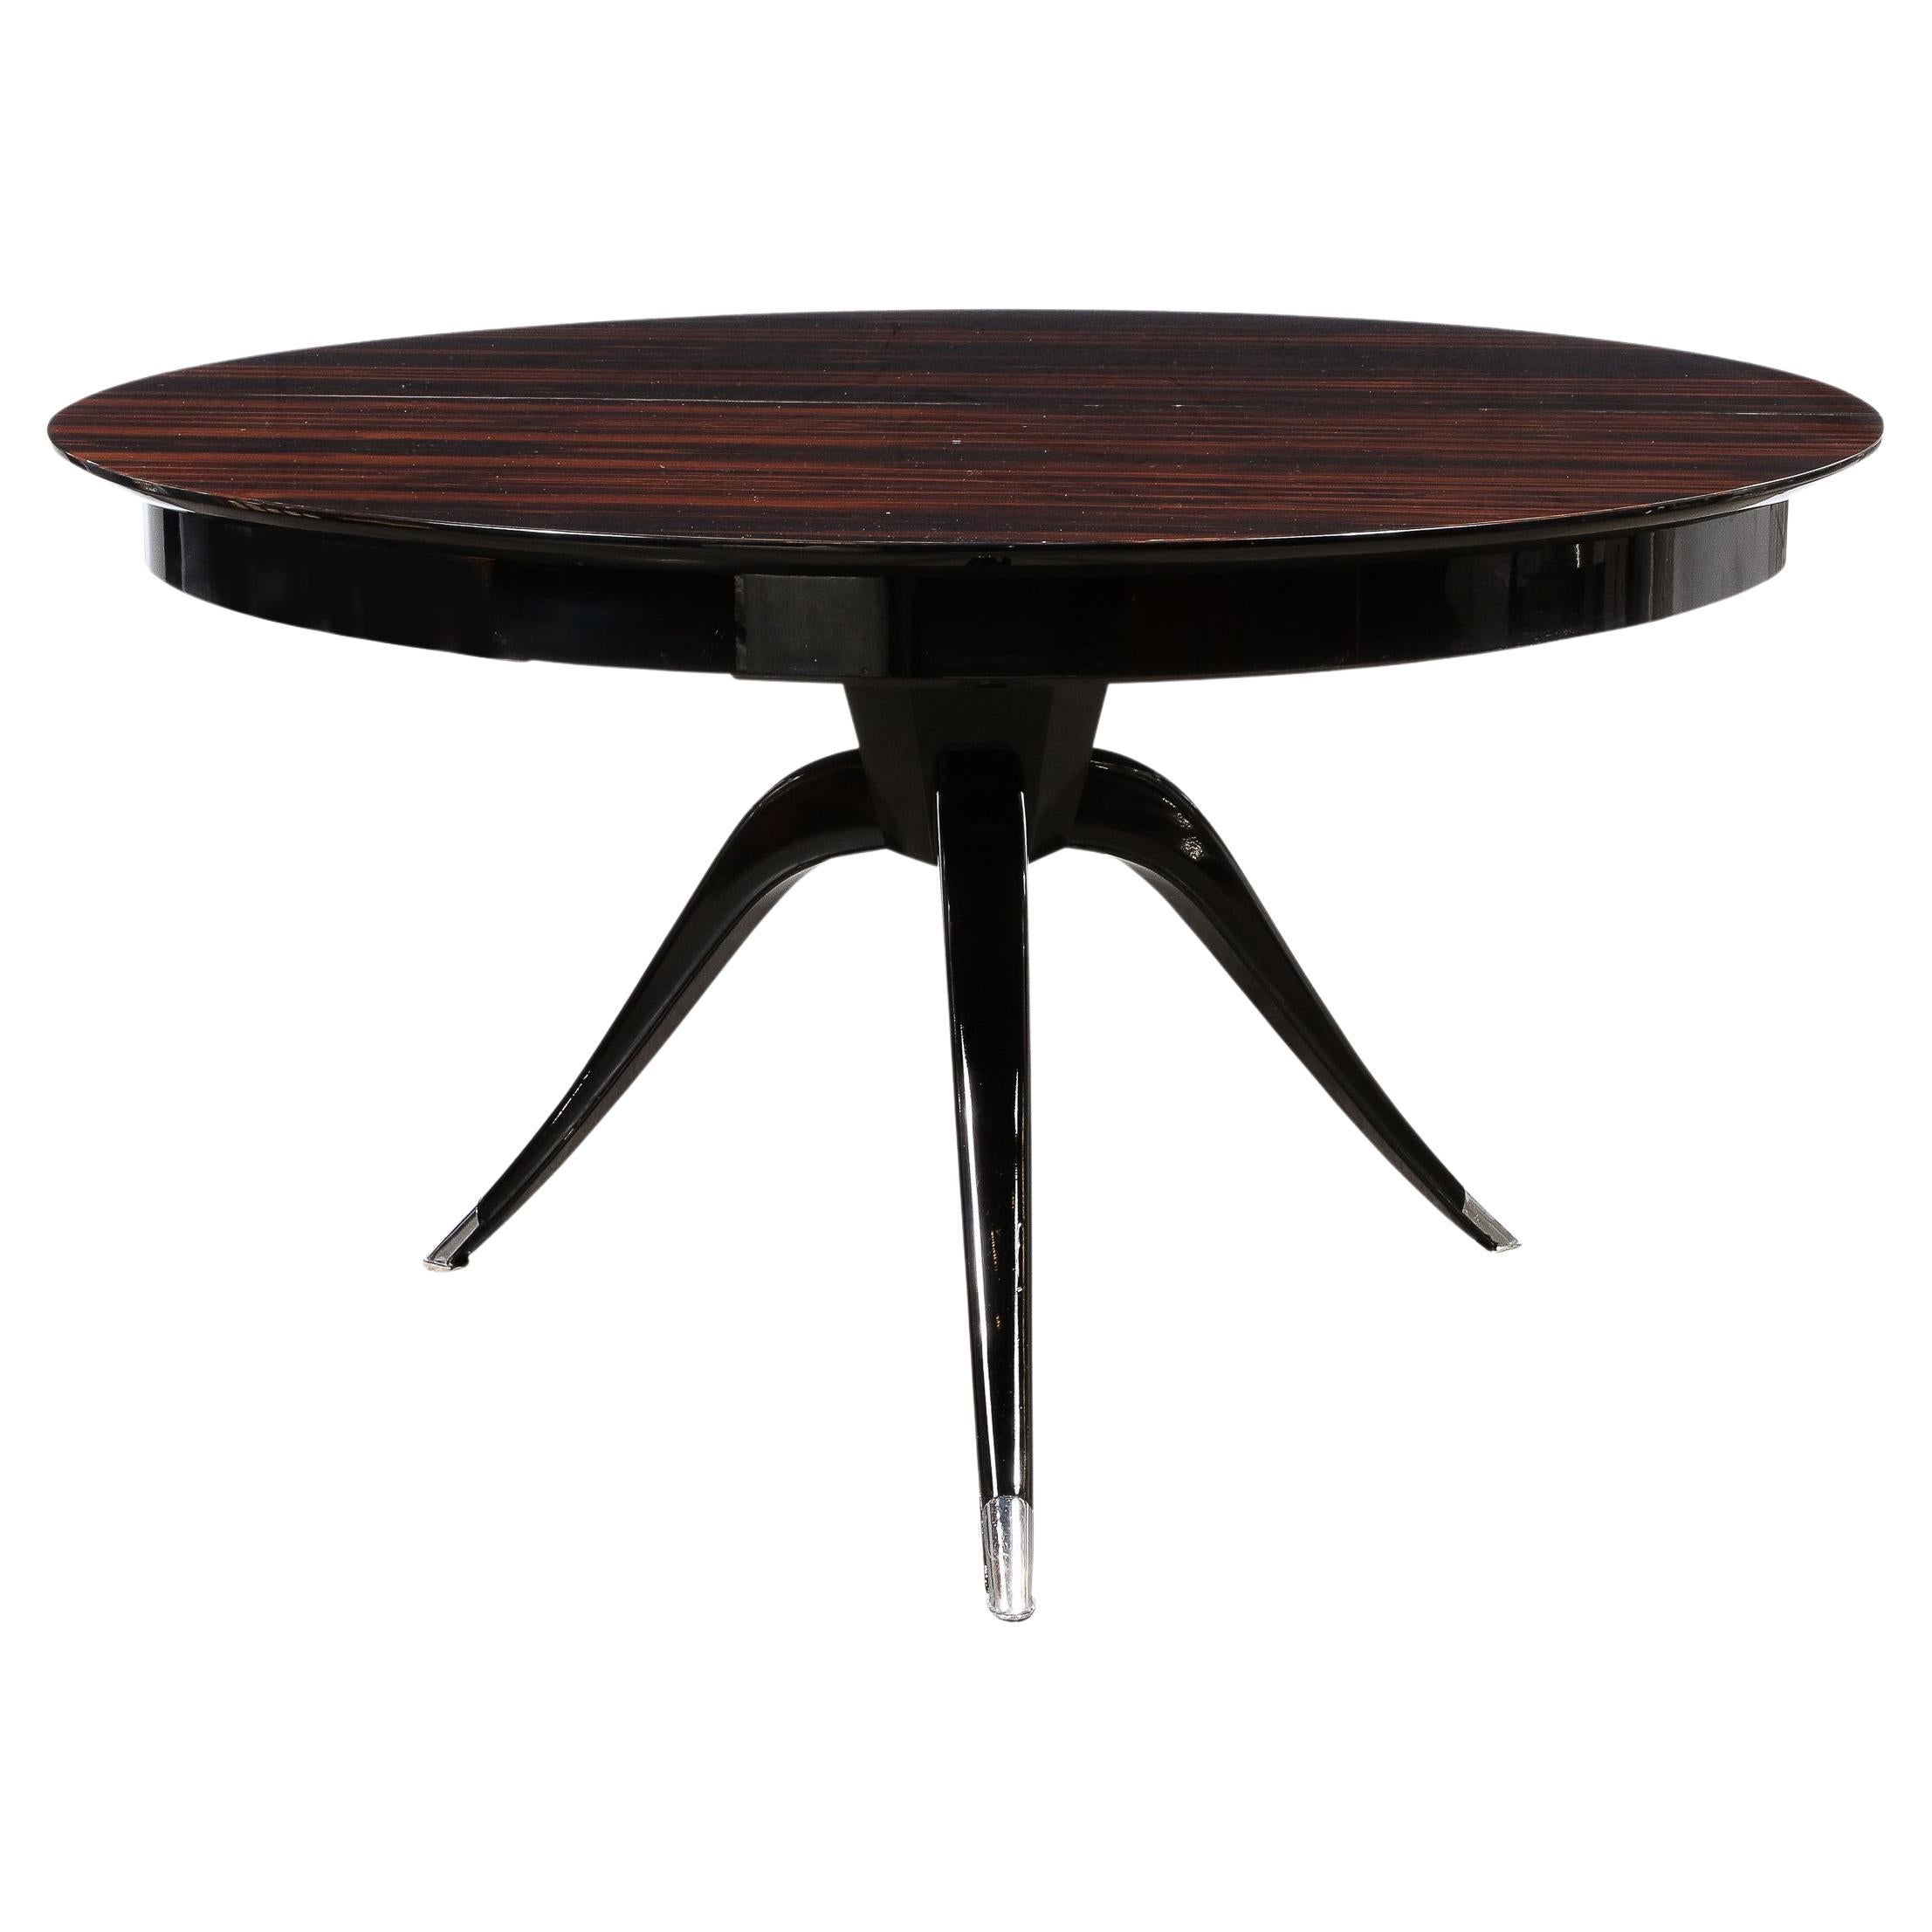 Art Deco Style Extendable Round Dining Table in Macassar Ebony w/ Tapered Legs